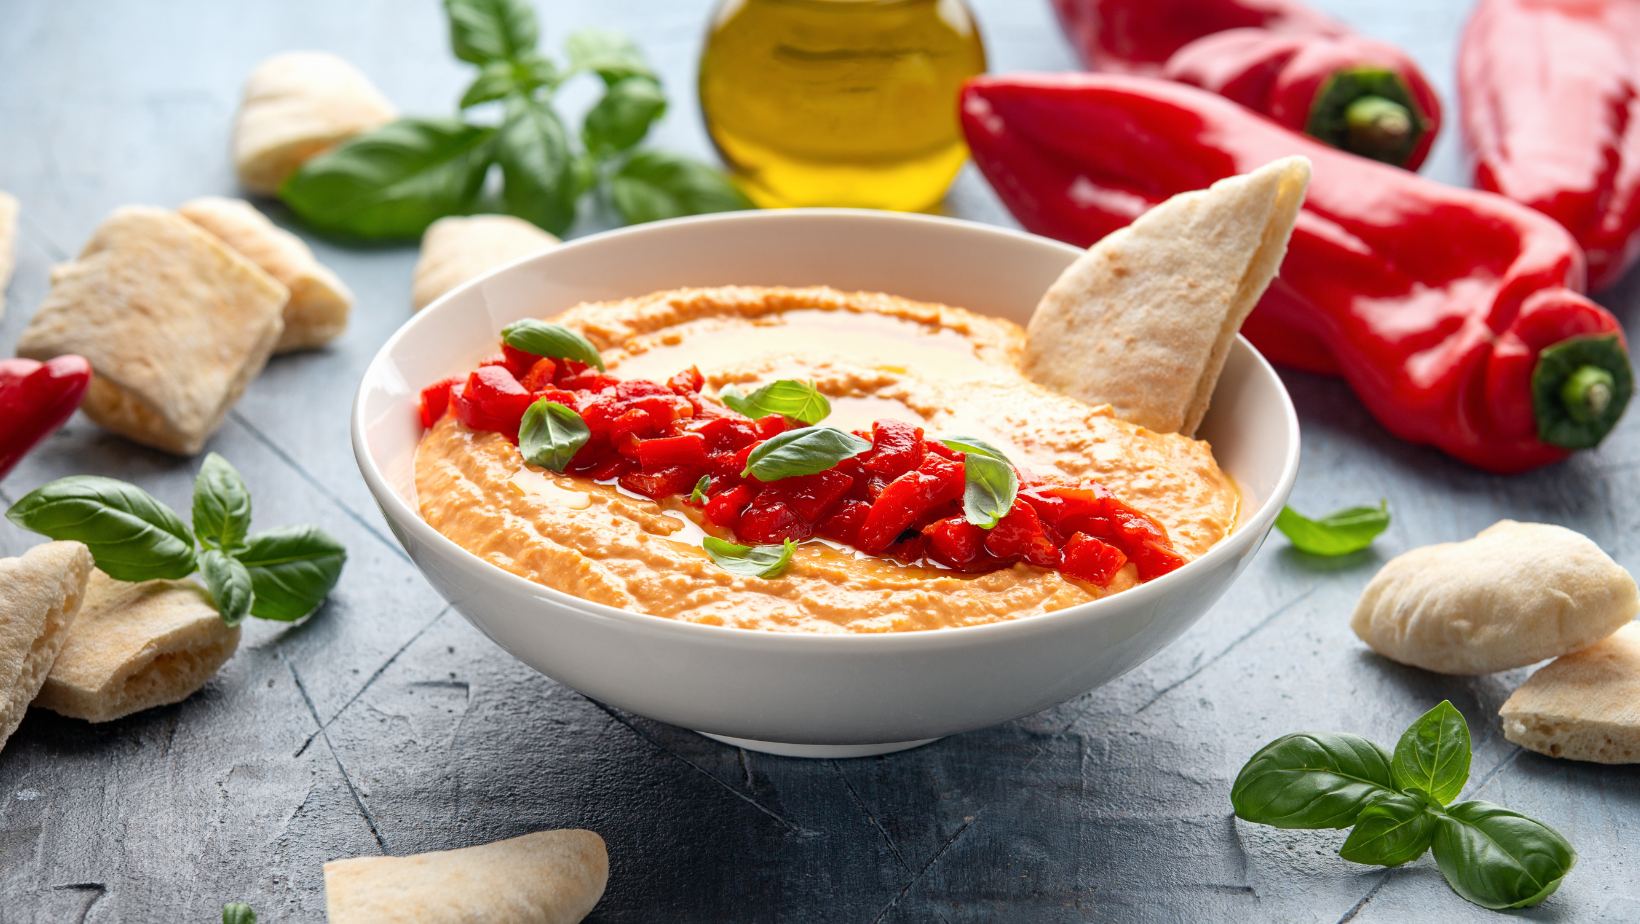 Roasted red pepper hummus with pita bread. Healthy food